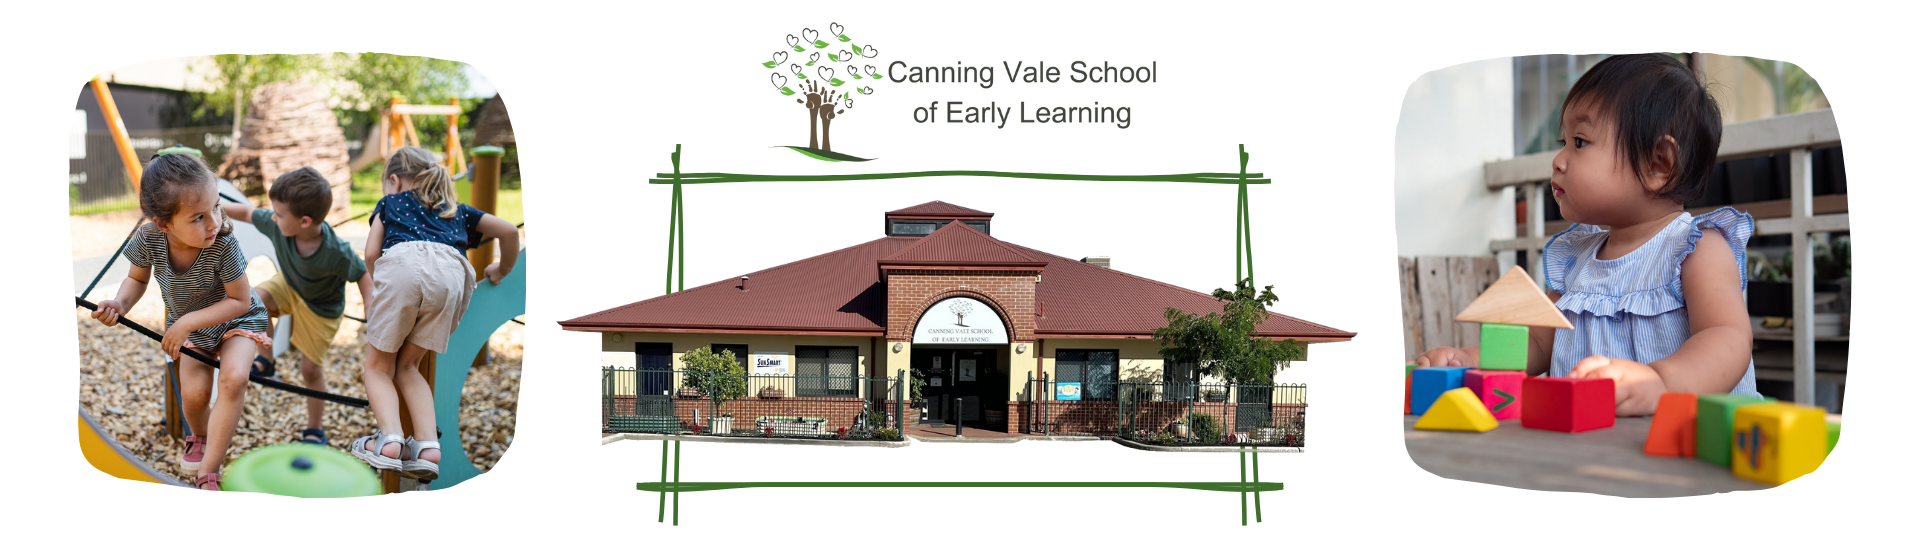 Canning Vale School of Early Learning